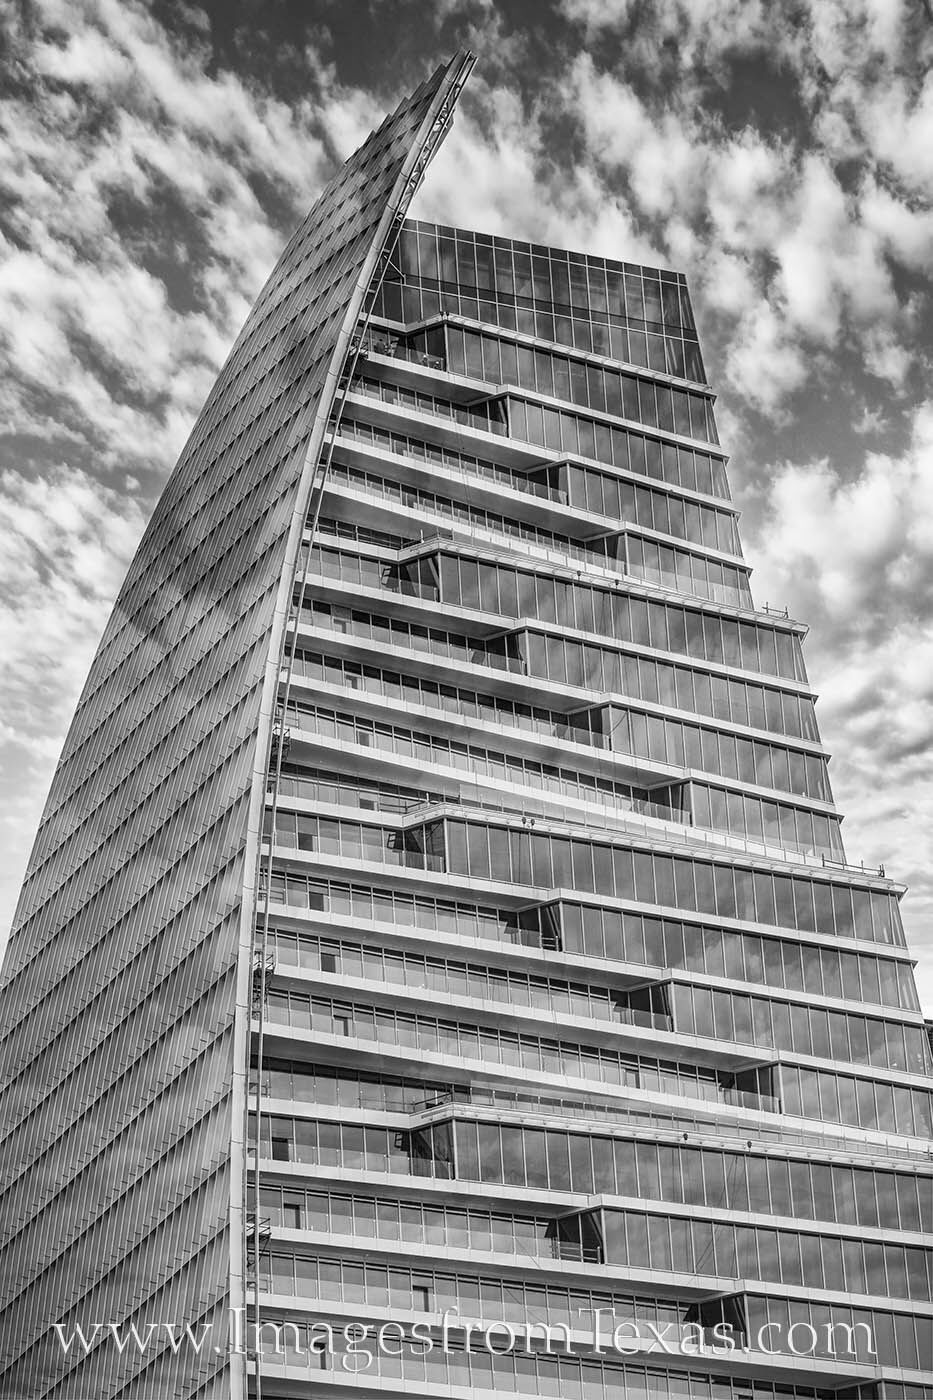 I took this series of images of the Google building more because of the clouds, and I loved the result in black and white from...